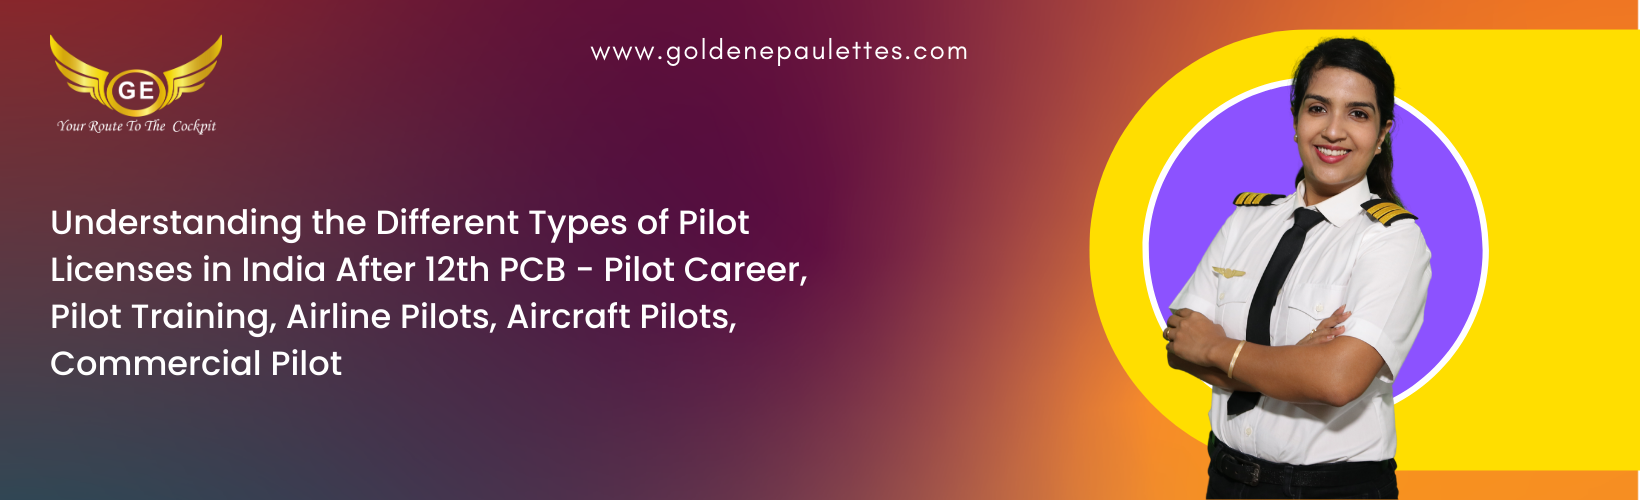 The Different Types of Pilot Licenses